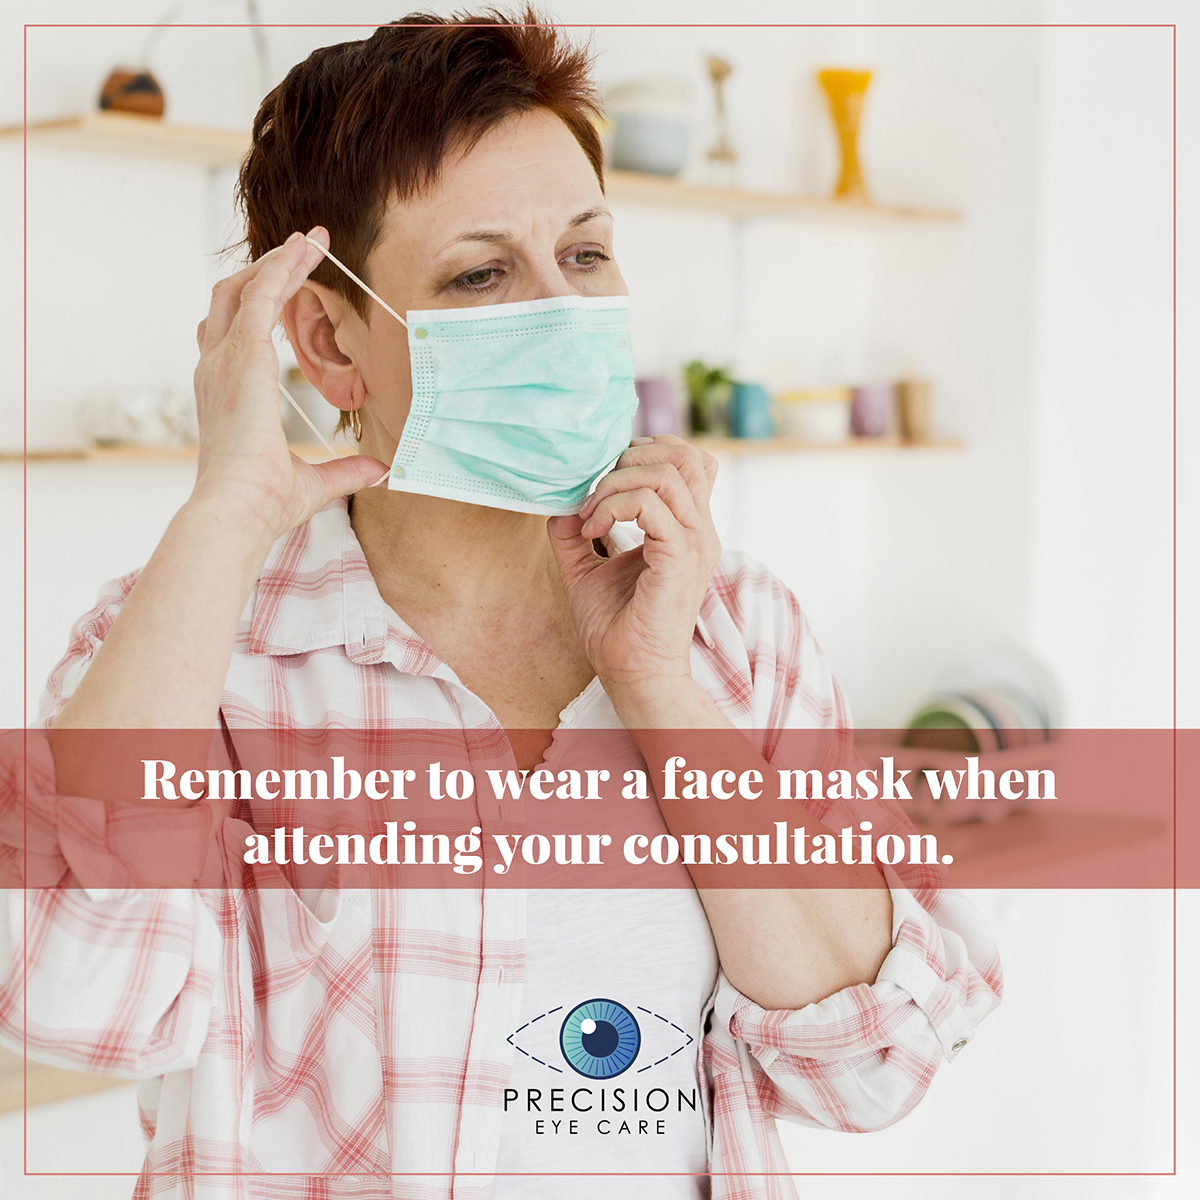 Remember to wear a face mask when attending your consultation.